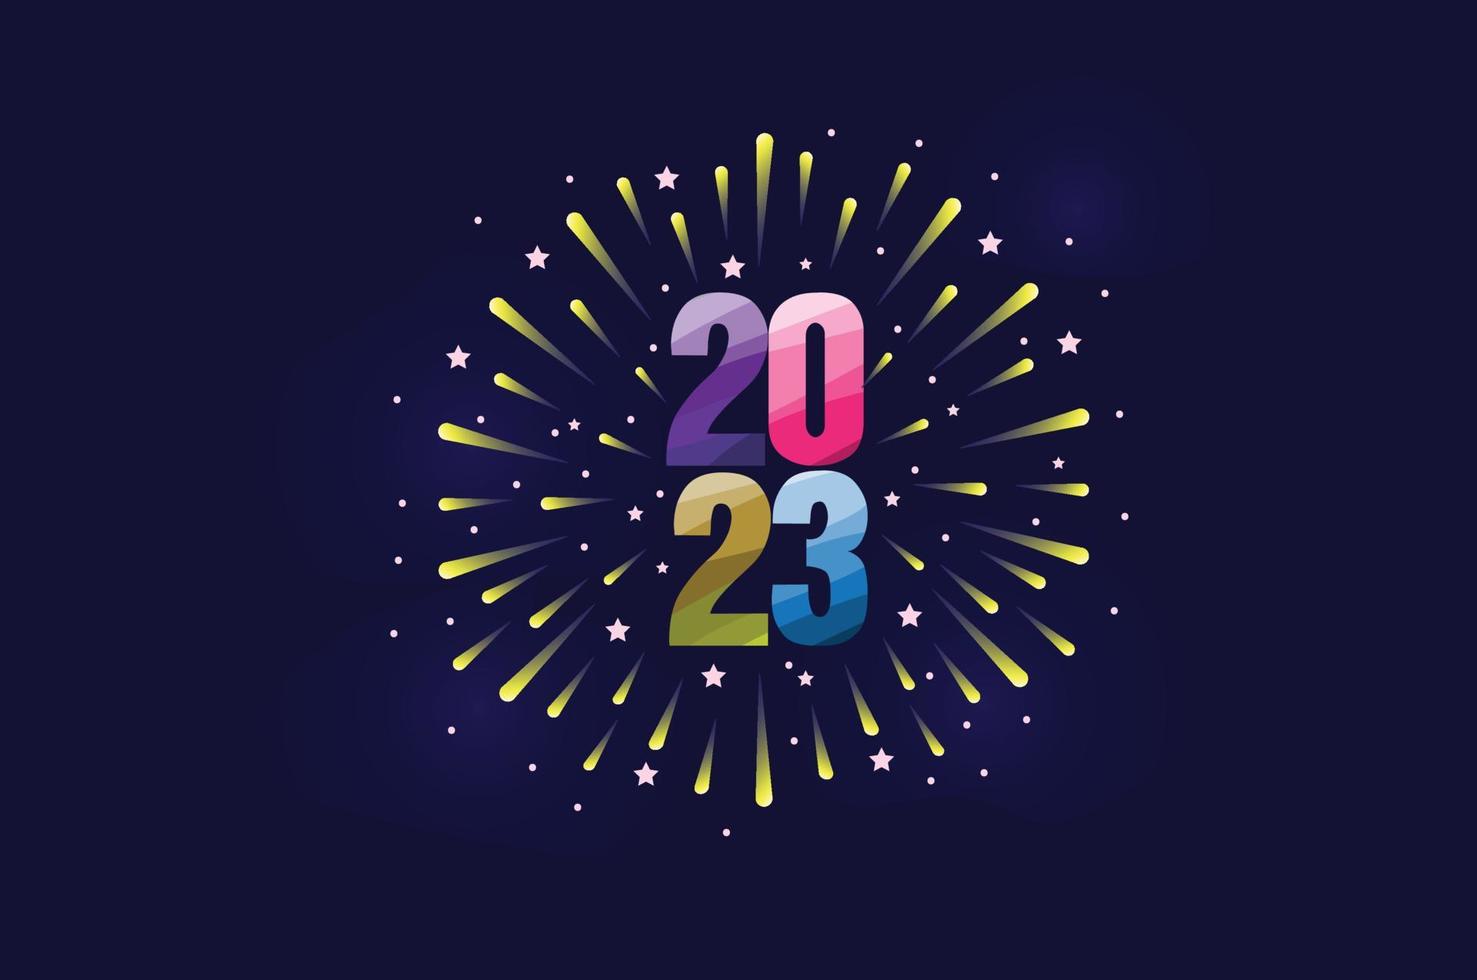 Happy New Year 2023 with fireworks vector